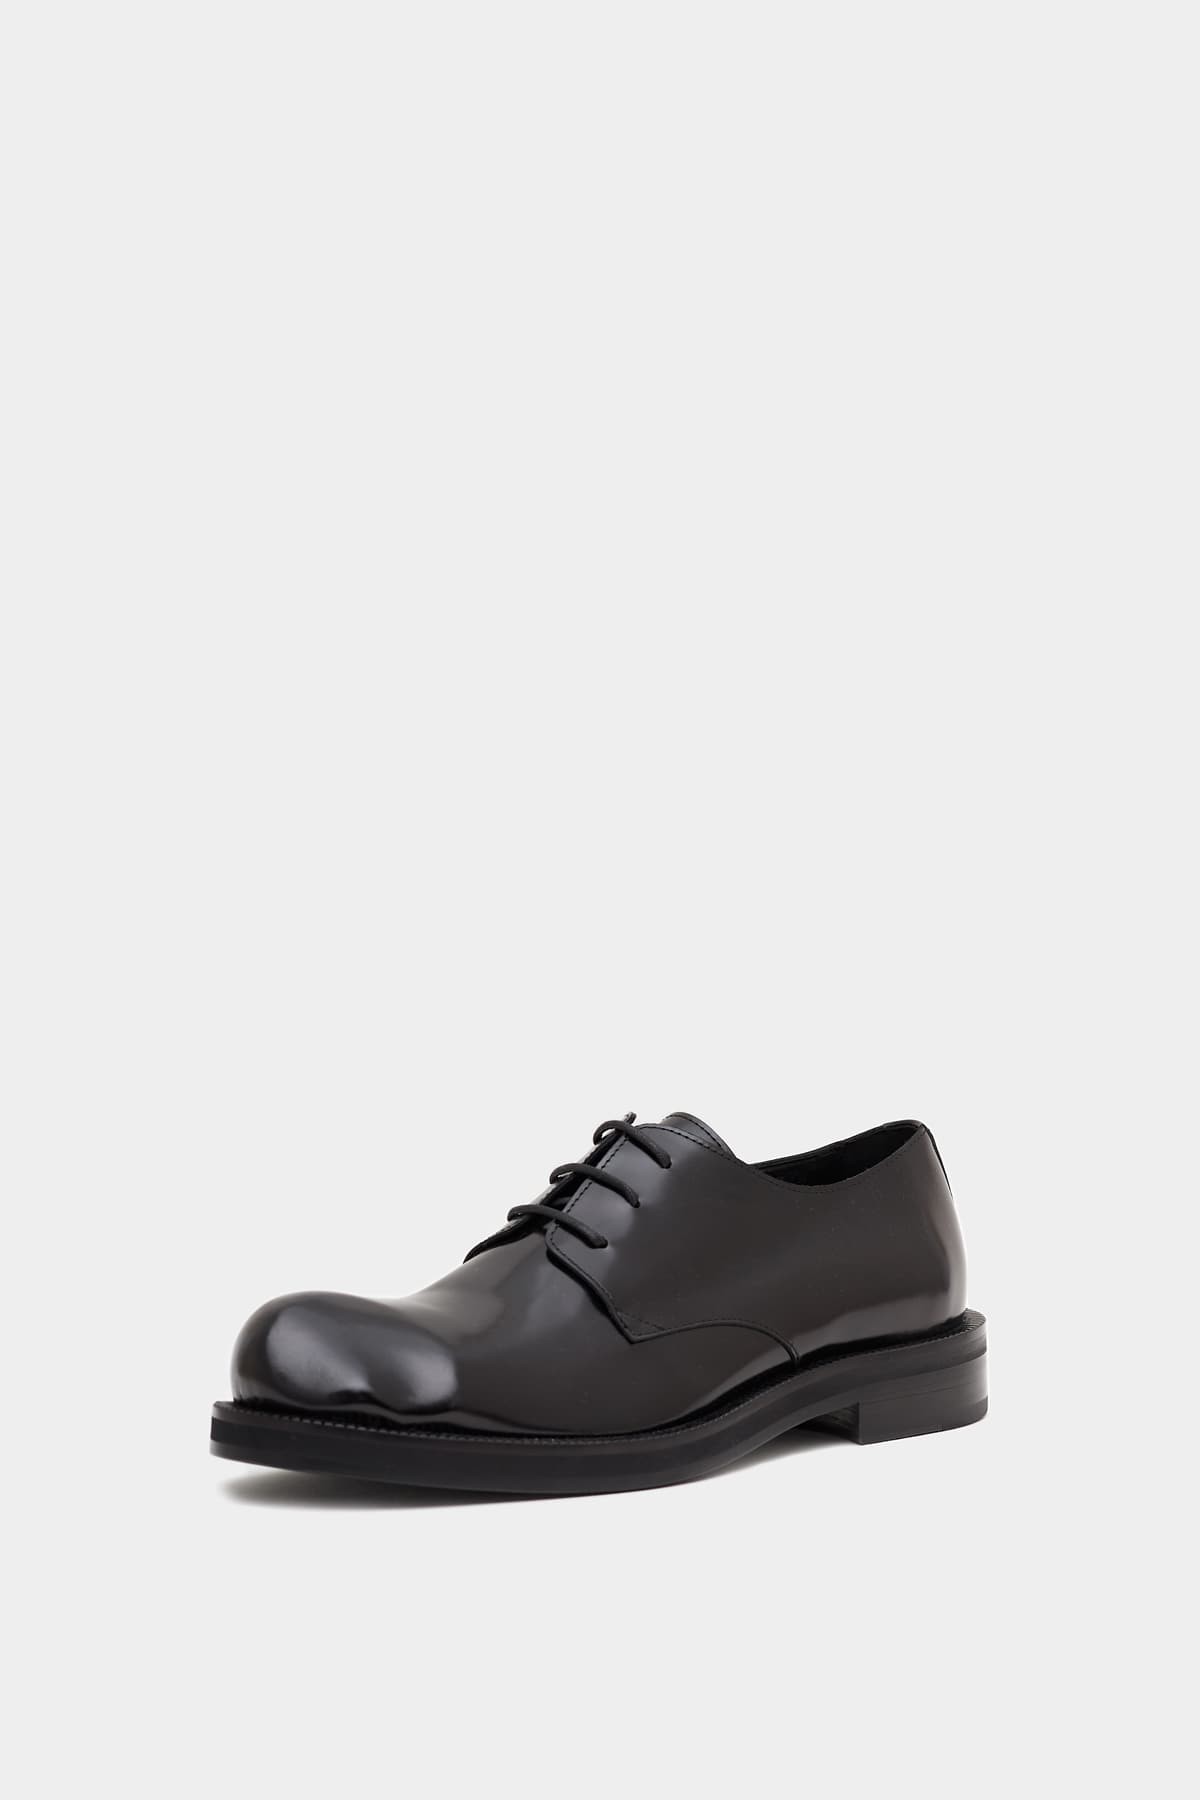 ACNE STUDIOS BLACK LEATHER DERBY SHOES | IAMNUE